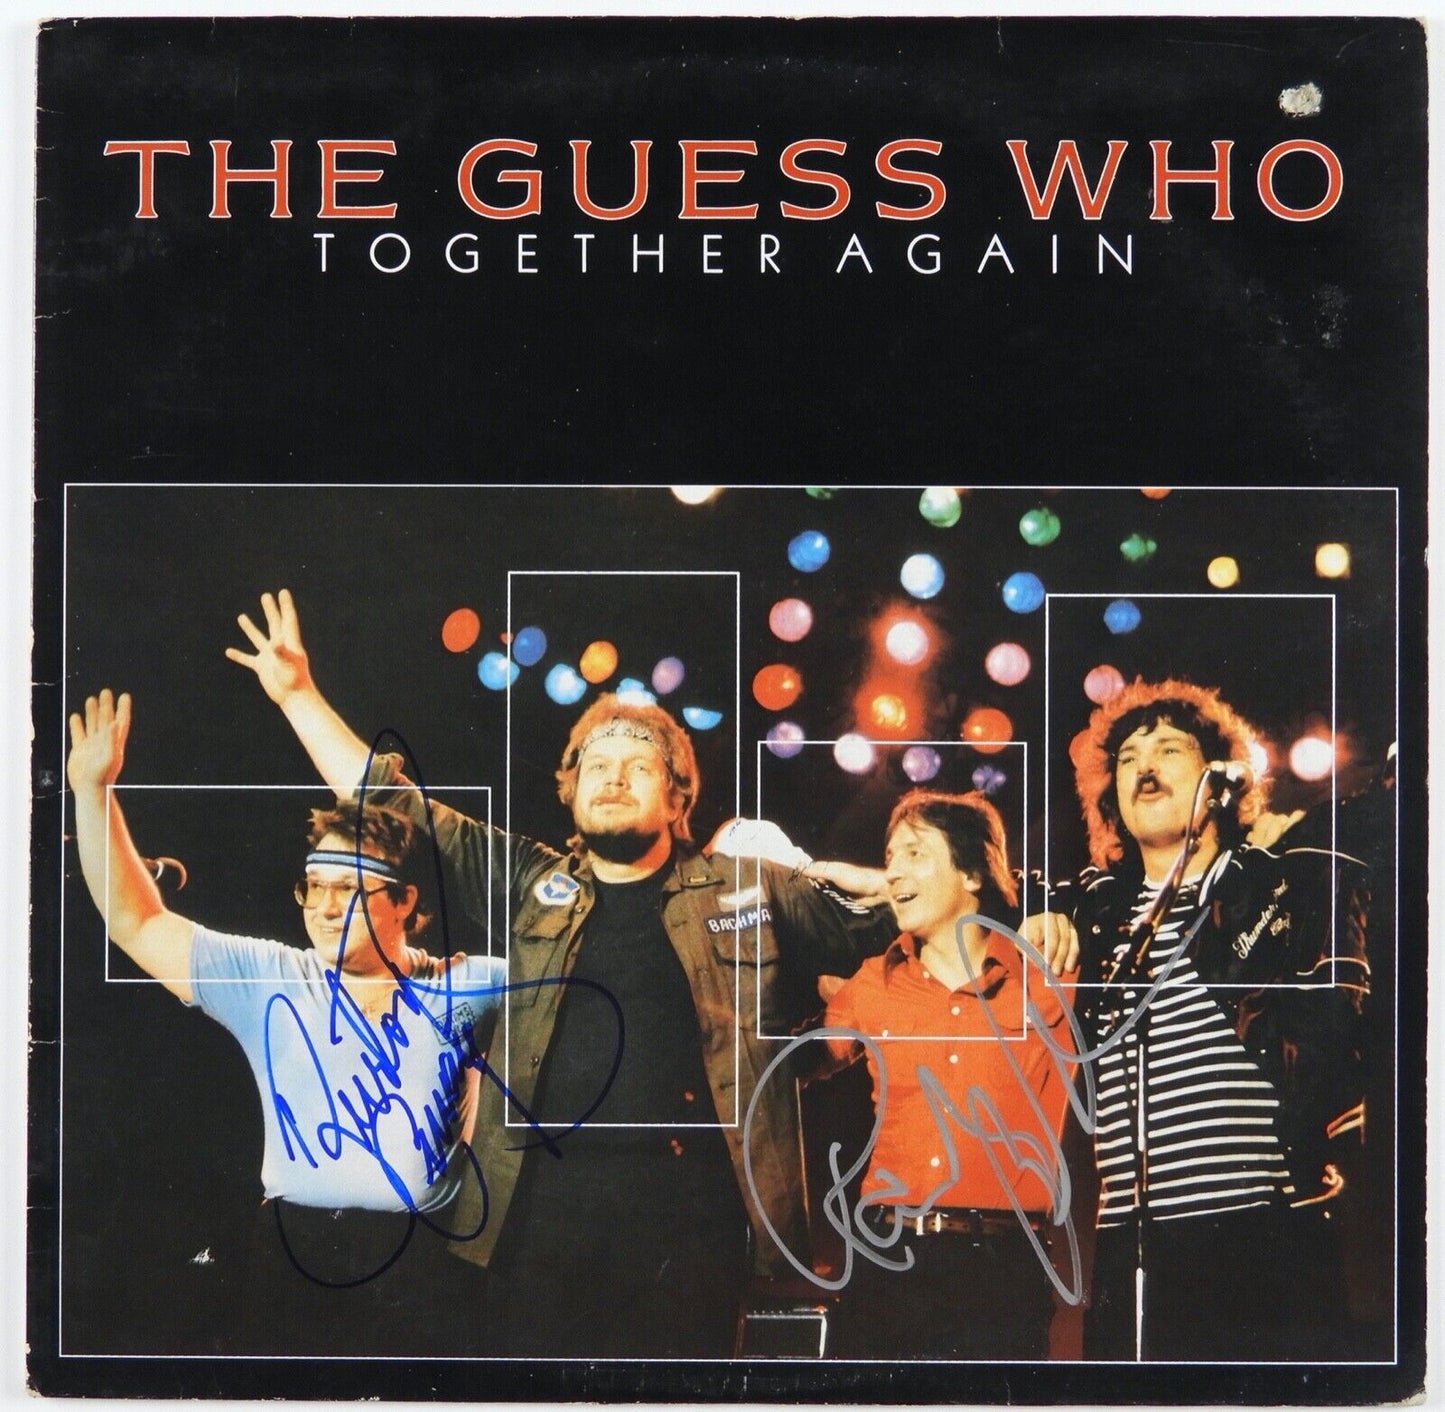 The Guess Who Signed Autograph Record Album JSA Together Again